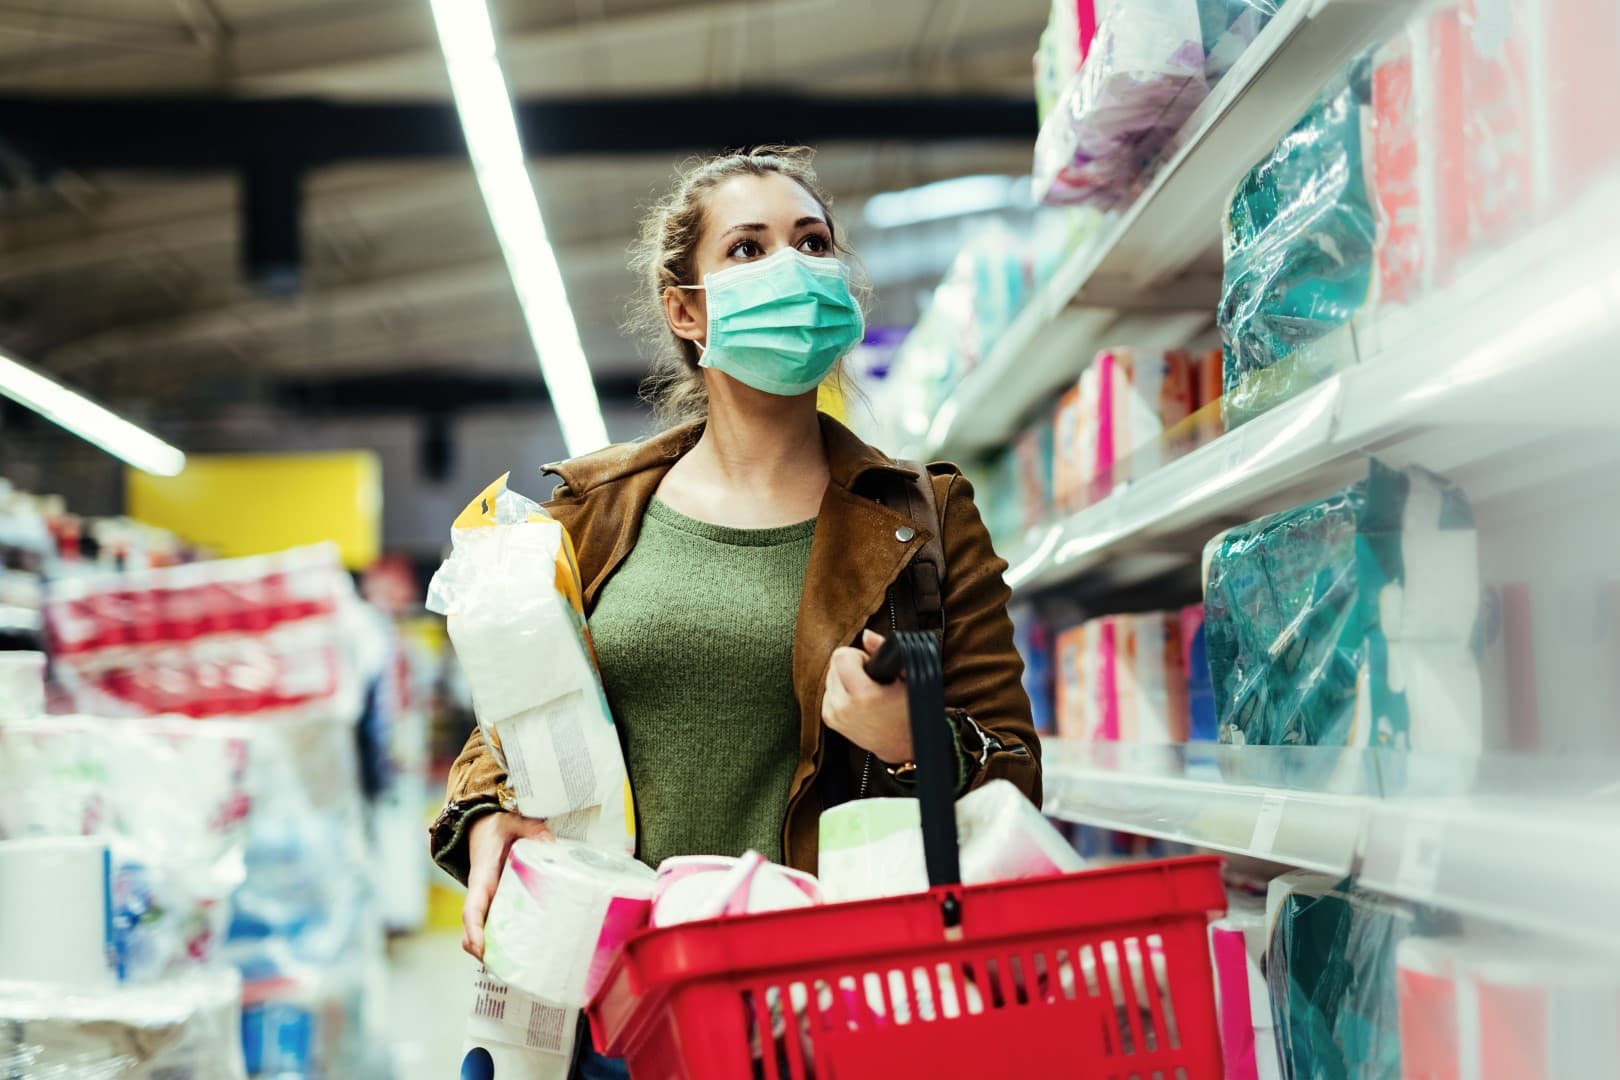 Woman with protective face mask buying toilet paper in the store during virus epidemic.